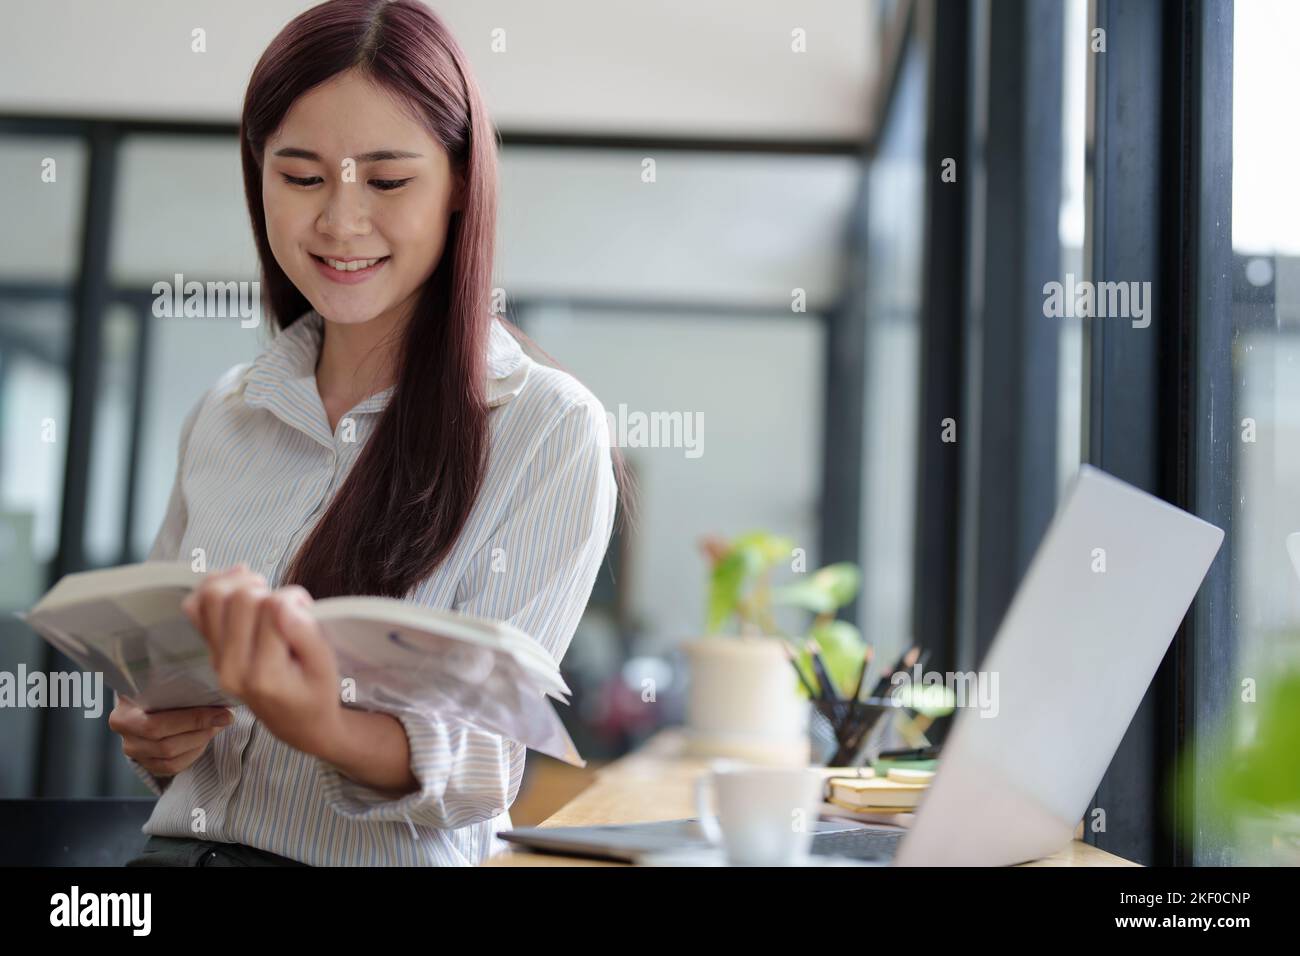 Portrait of an Asian woman reading a book during her lunch break Stock Photo